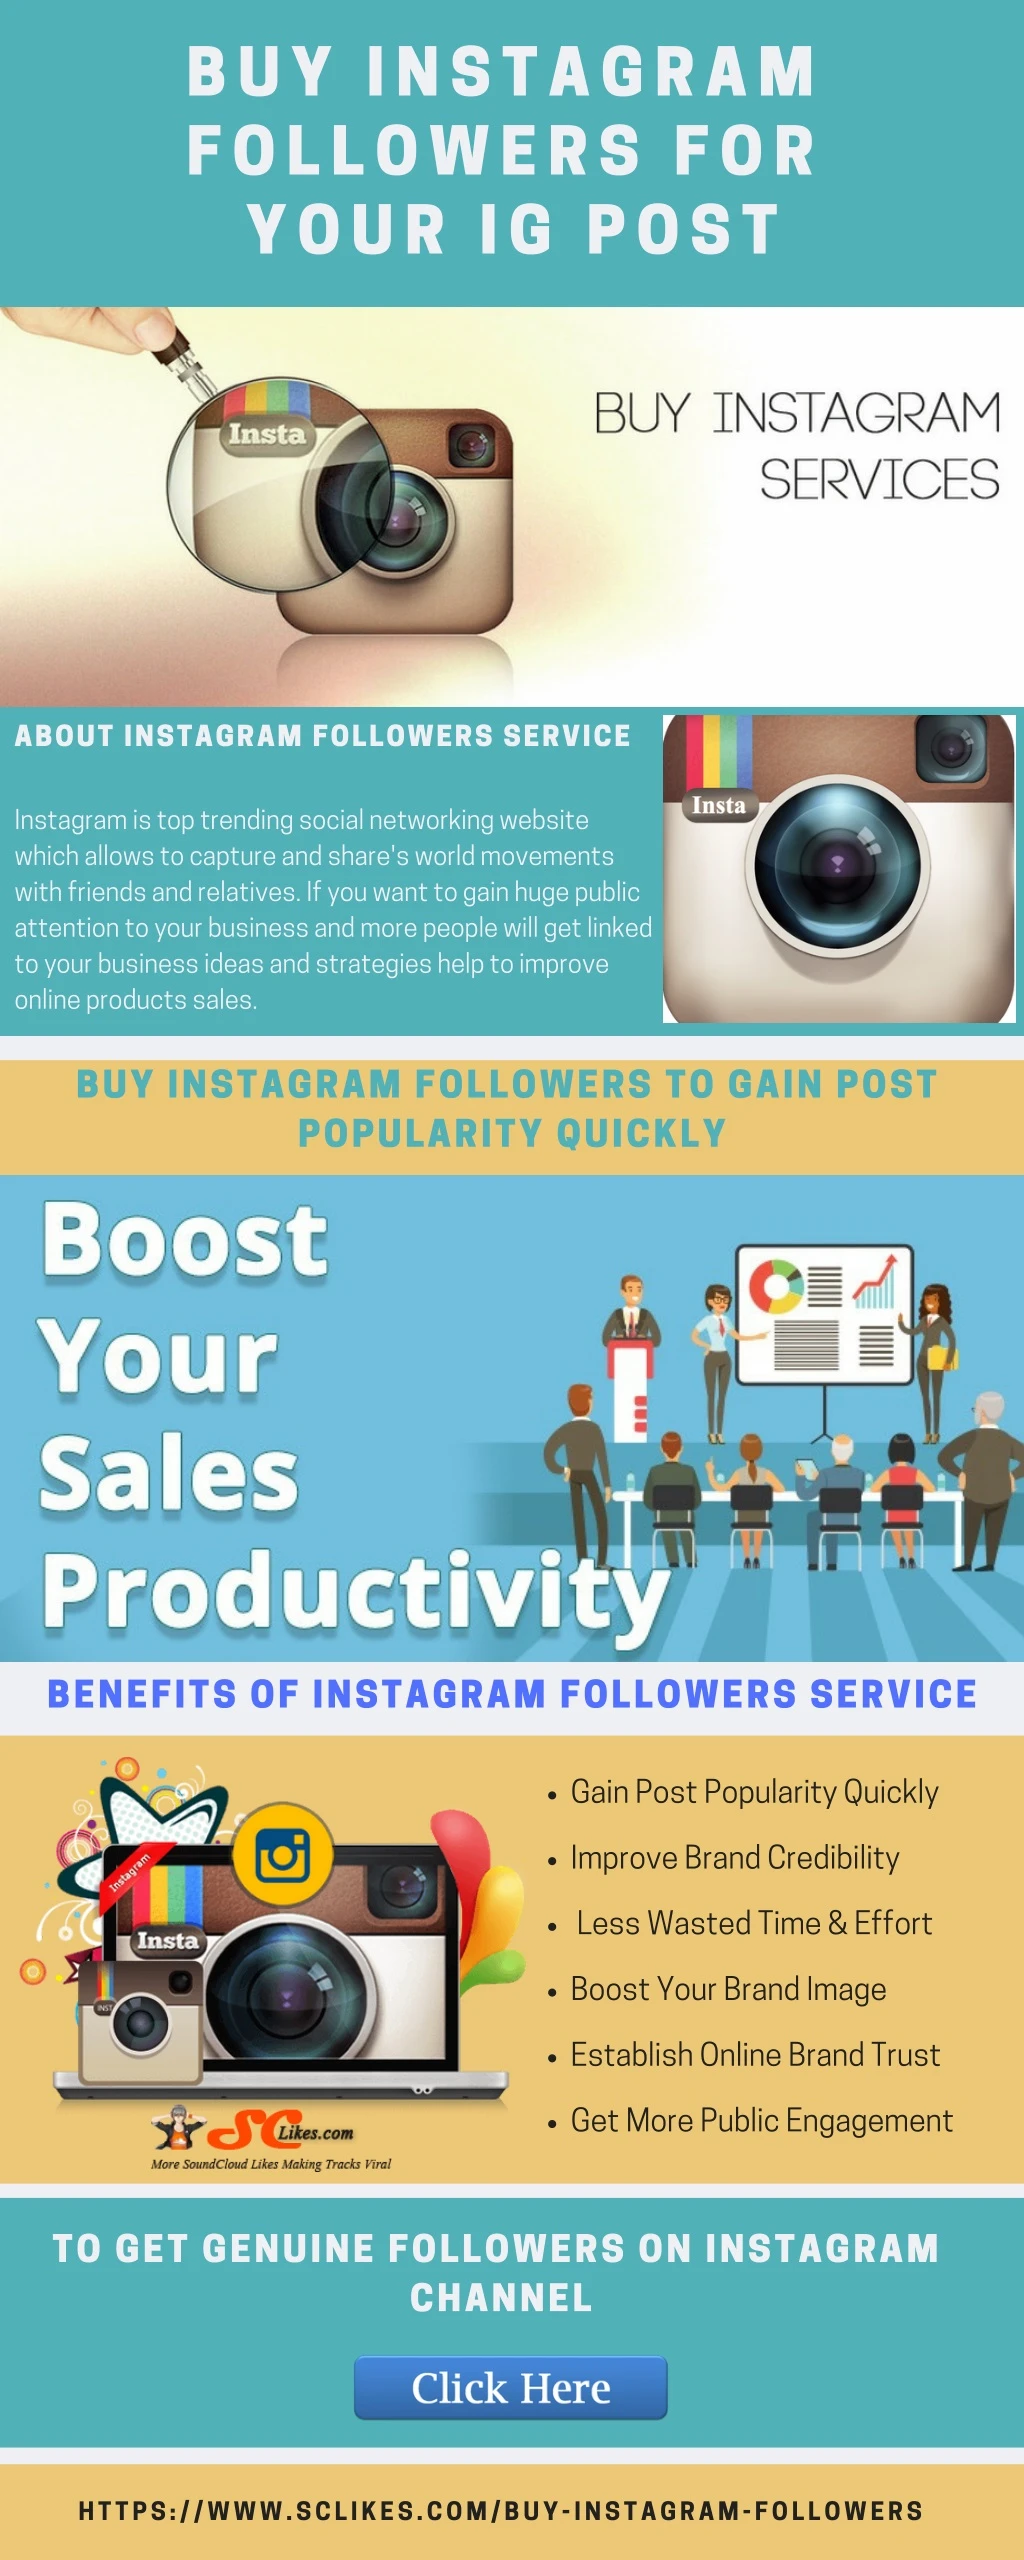 buy instagram followers for your ig post